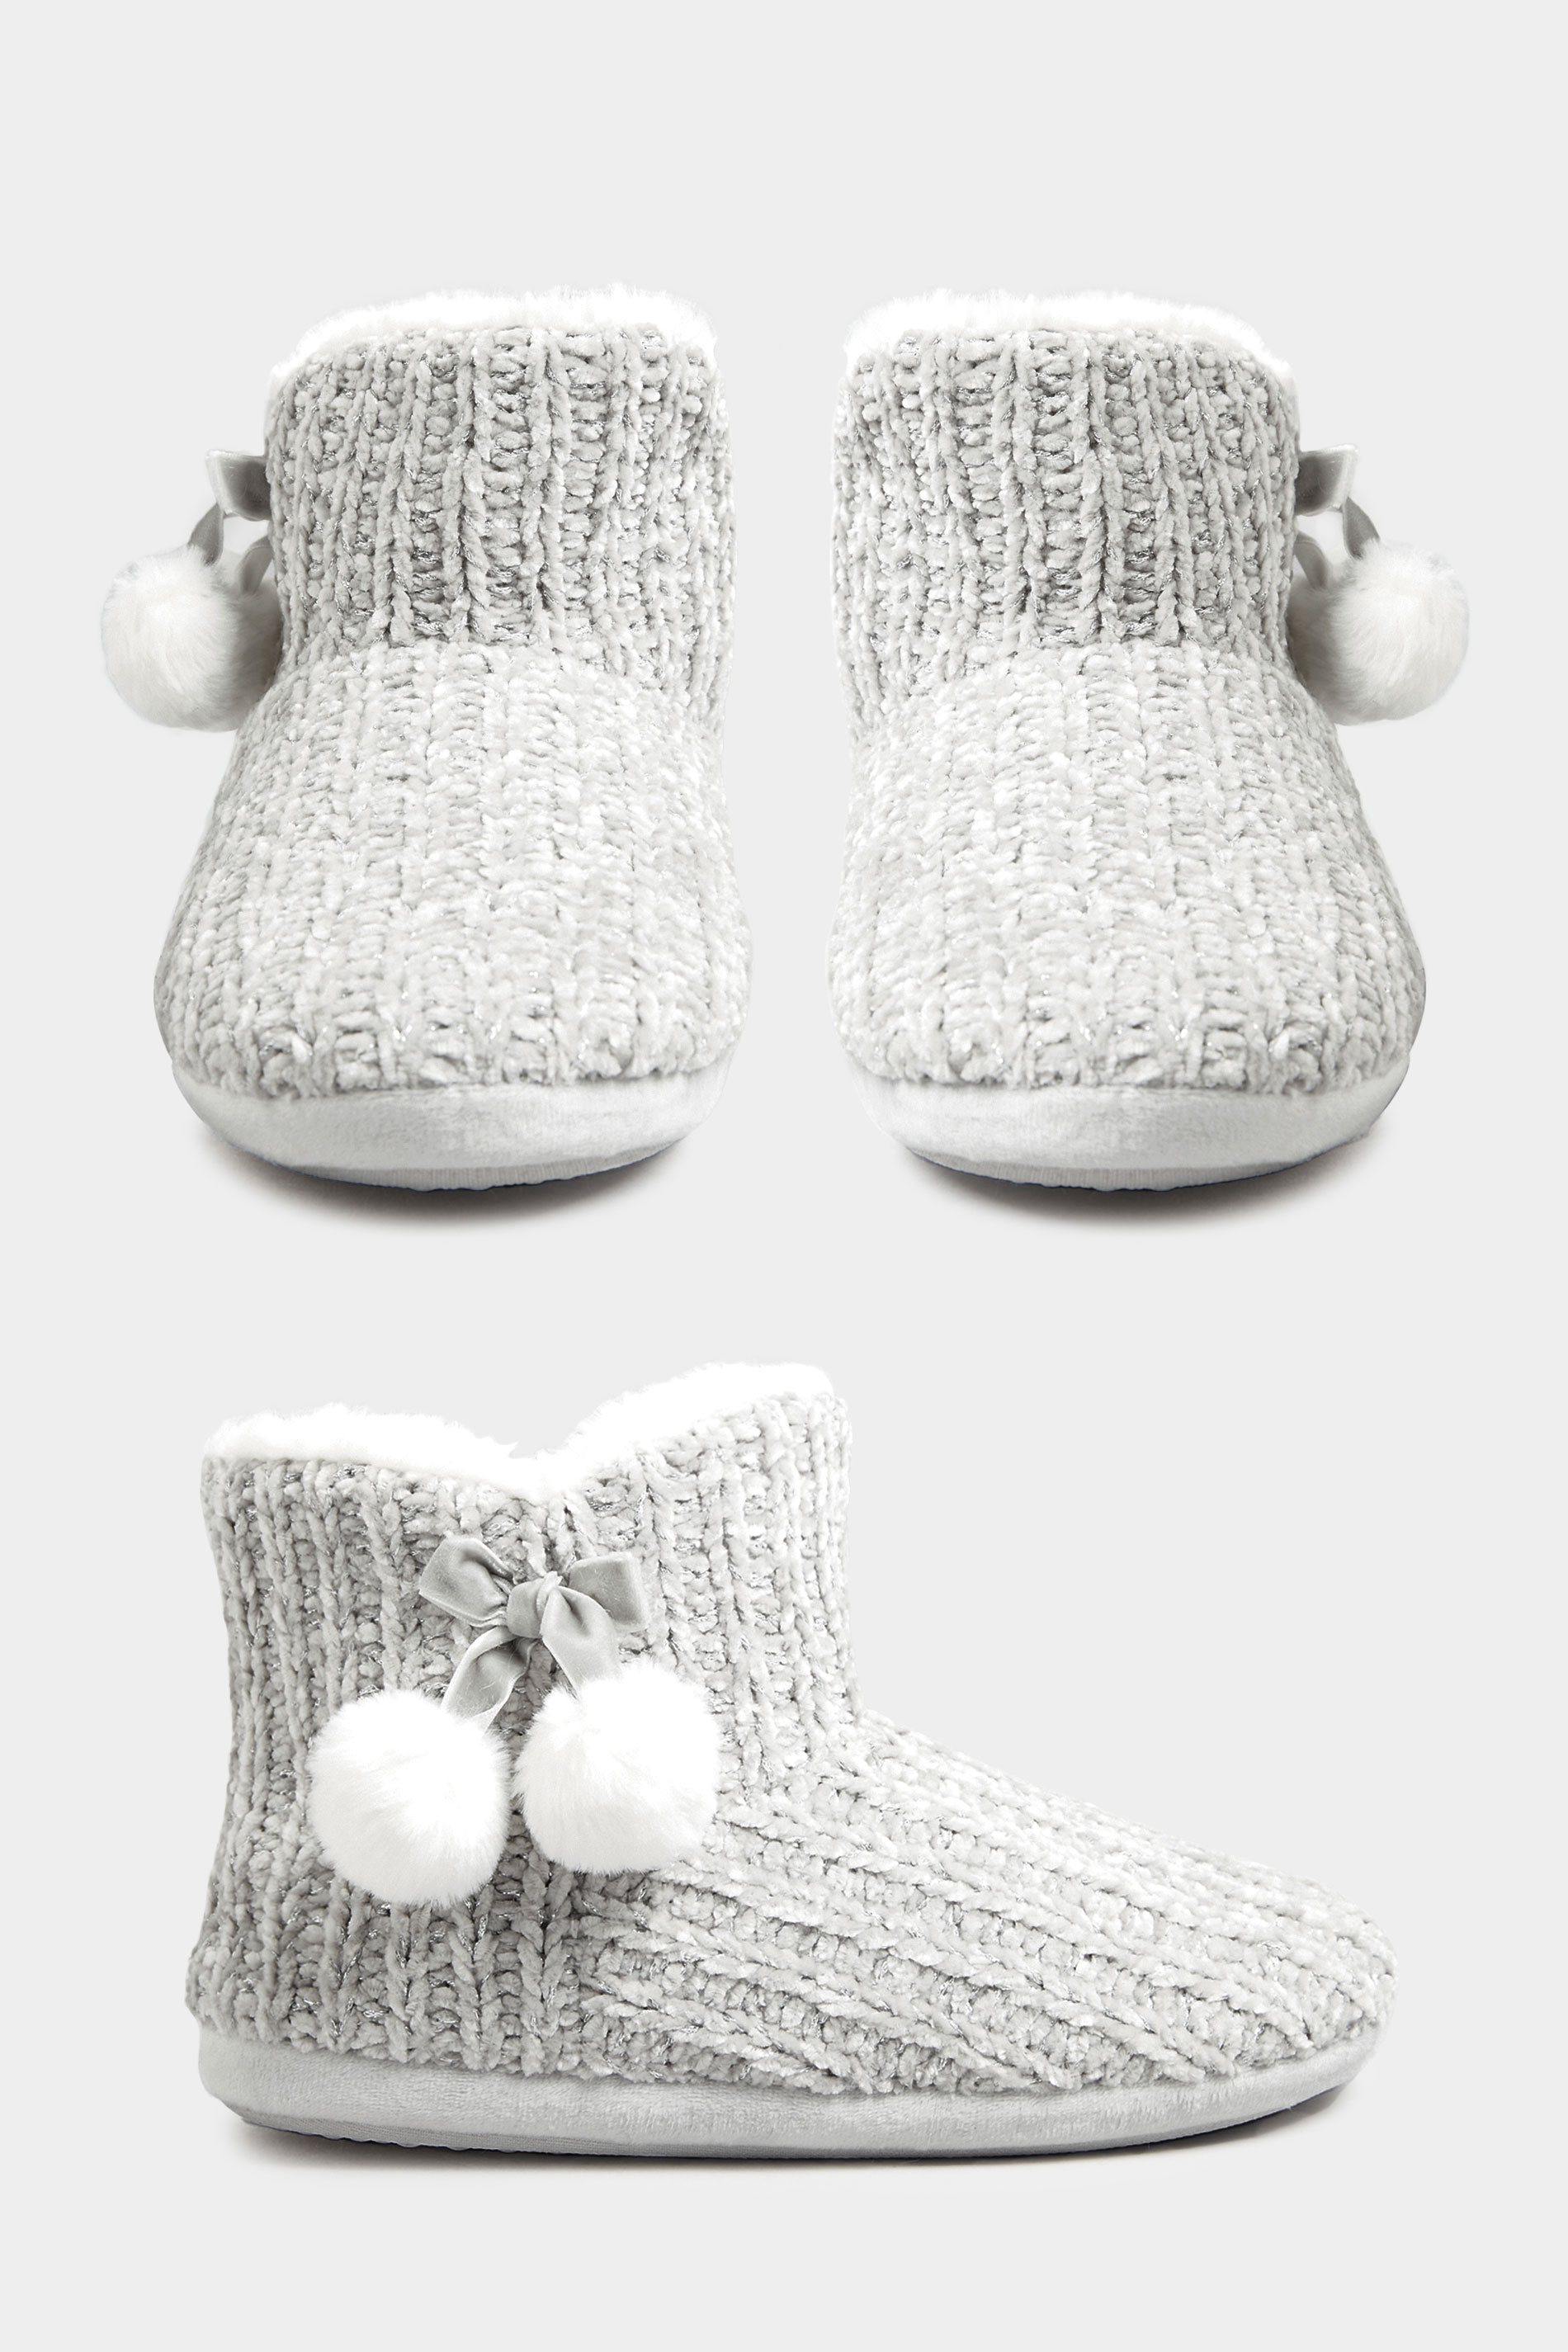 Grey Pom Pom Boot Slippers In Extra Wide Fit | Yours Clothing